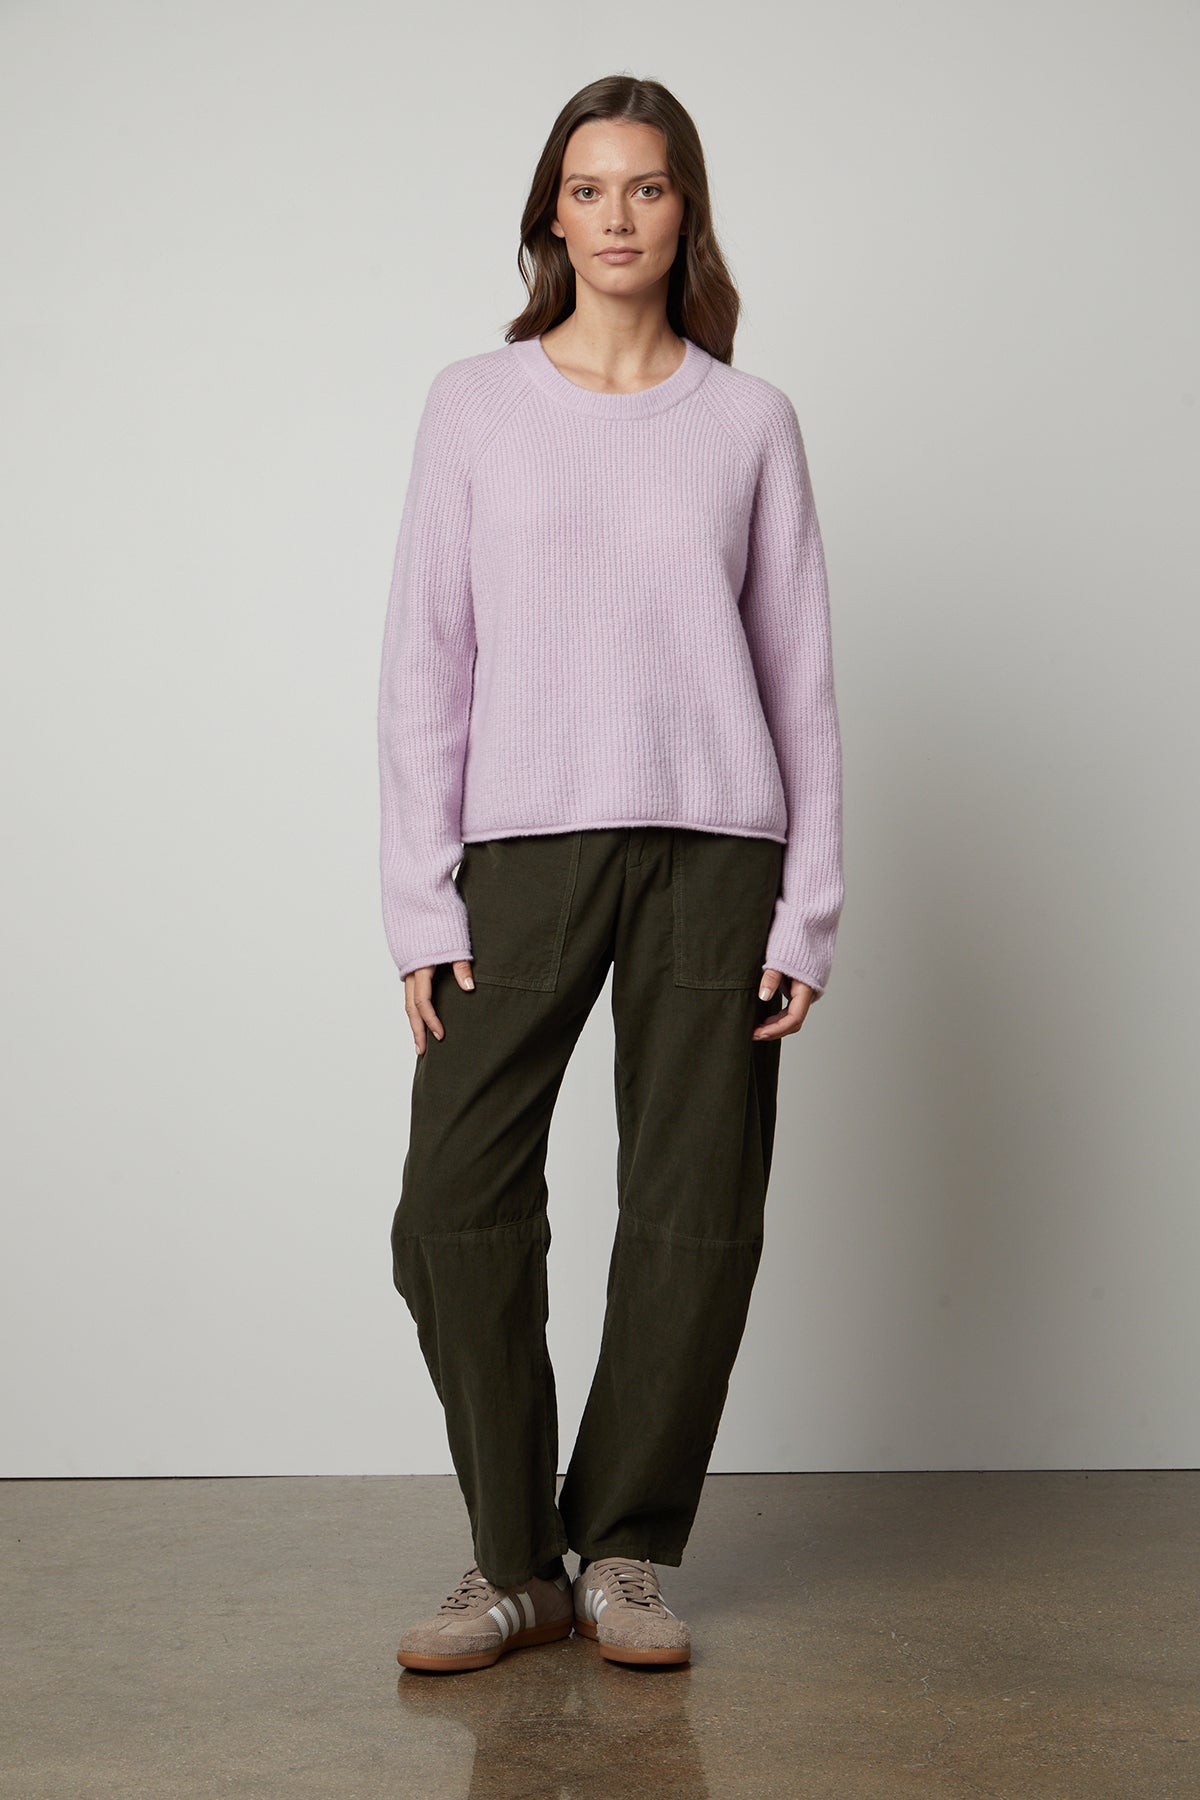   A woman wearing a cozy GIGI CREW NECK SWEATER by Velvet by Graham & Spencer. 